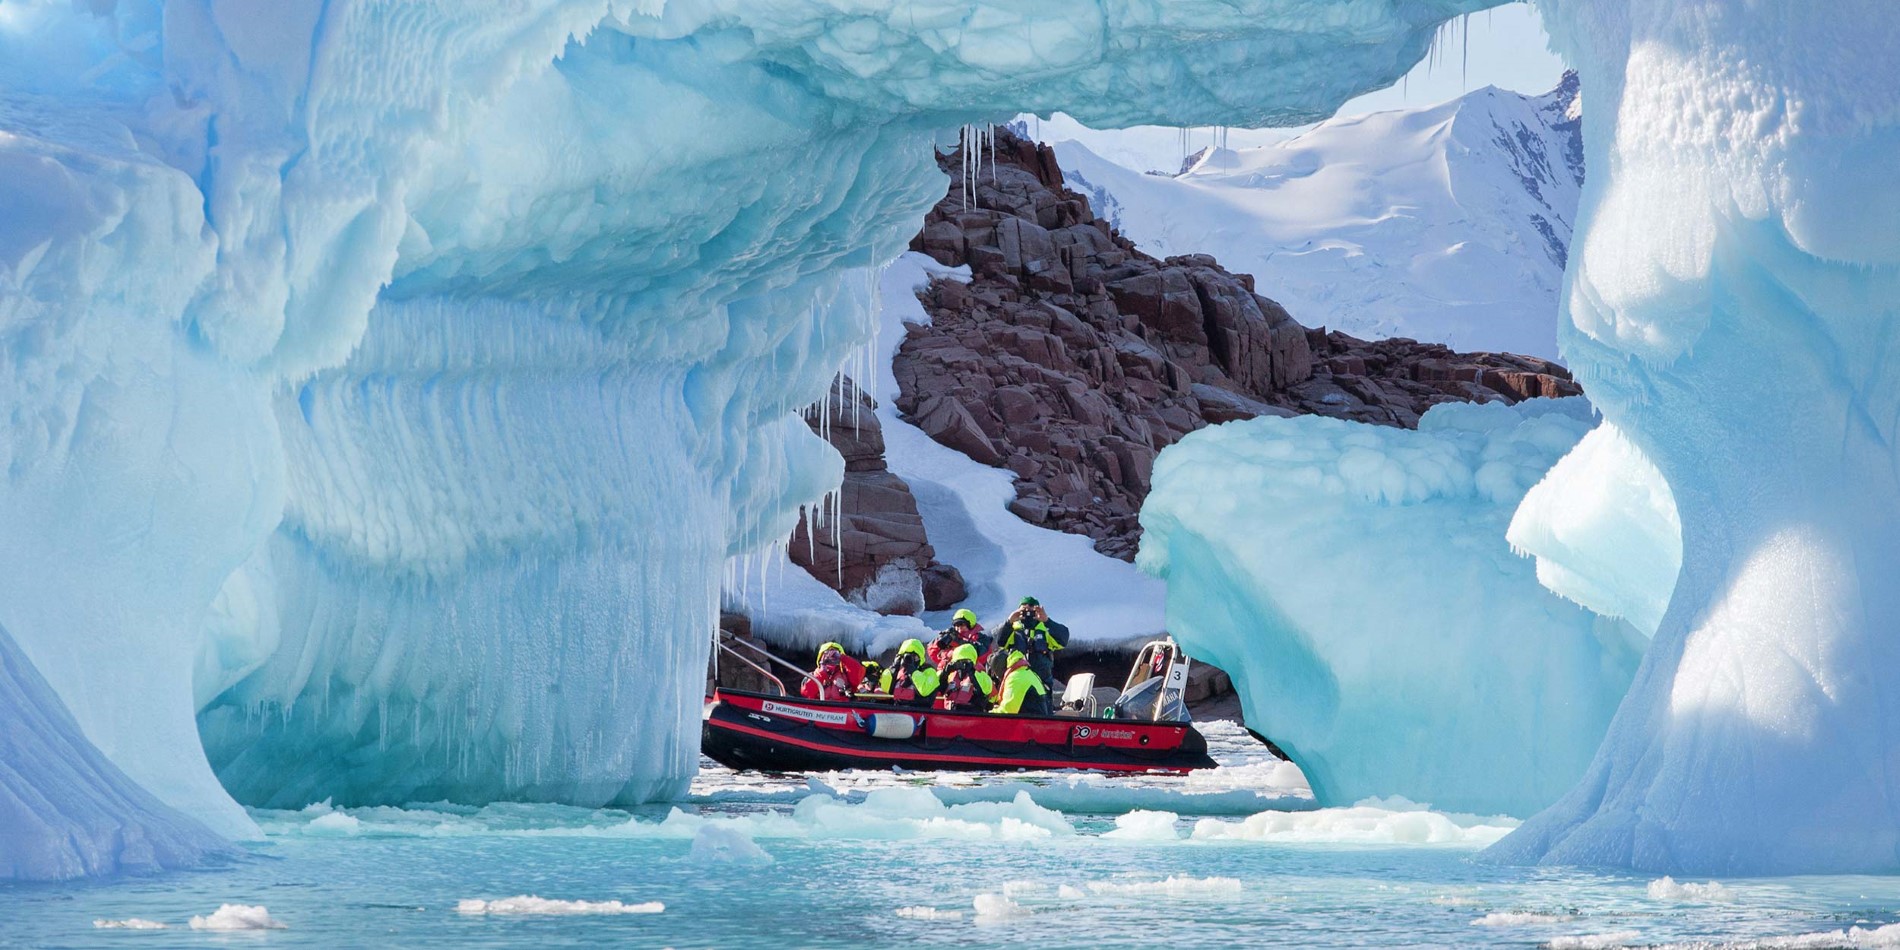 Group of tourists in small boat among spectacular ice formations